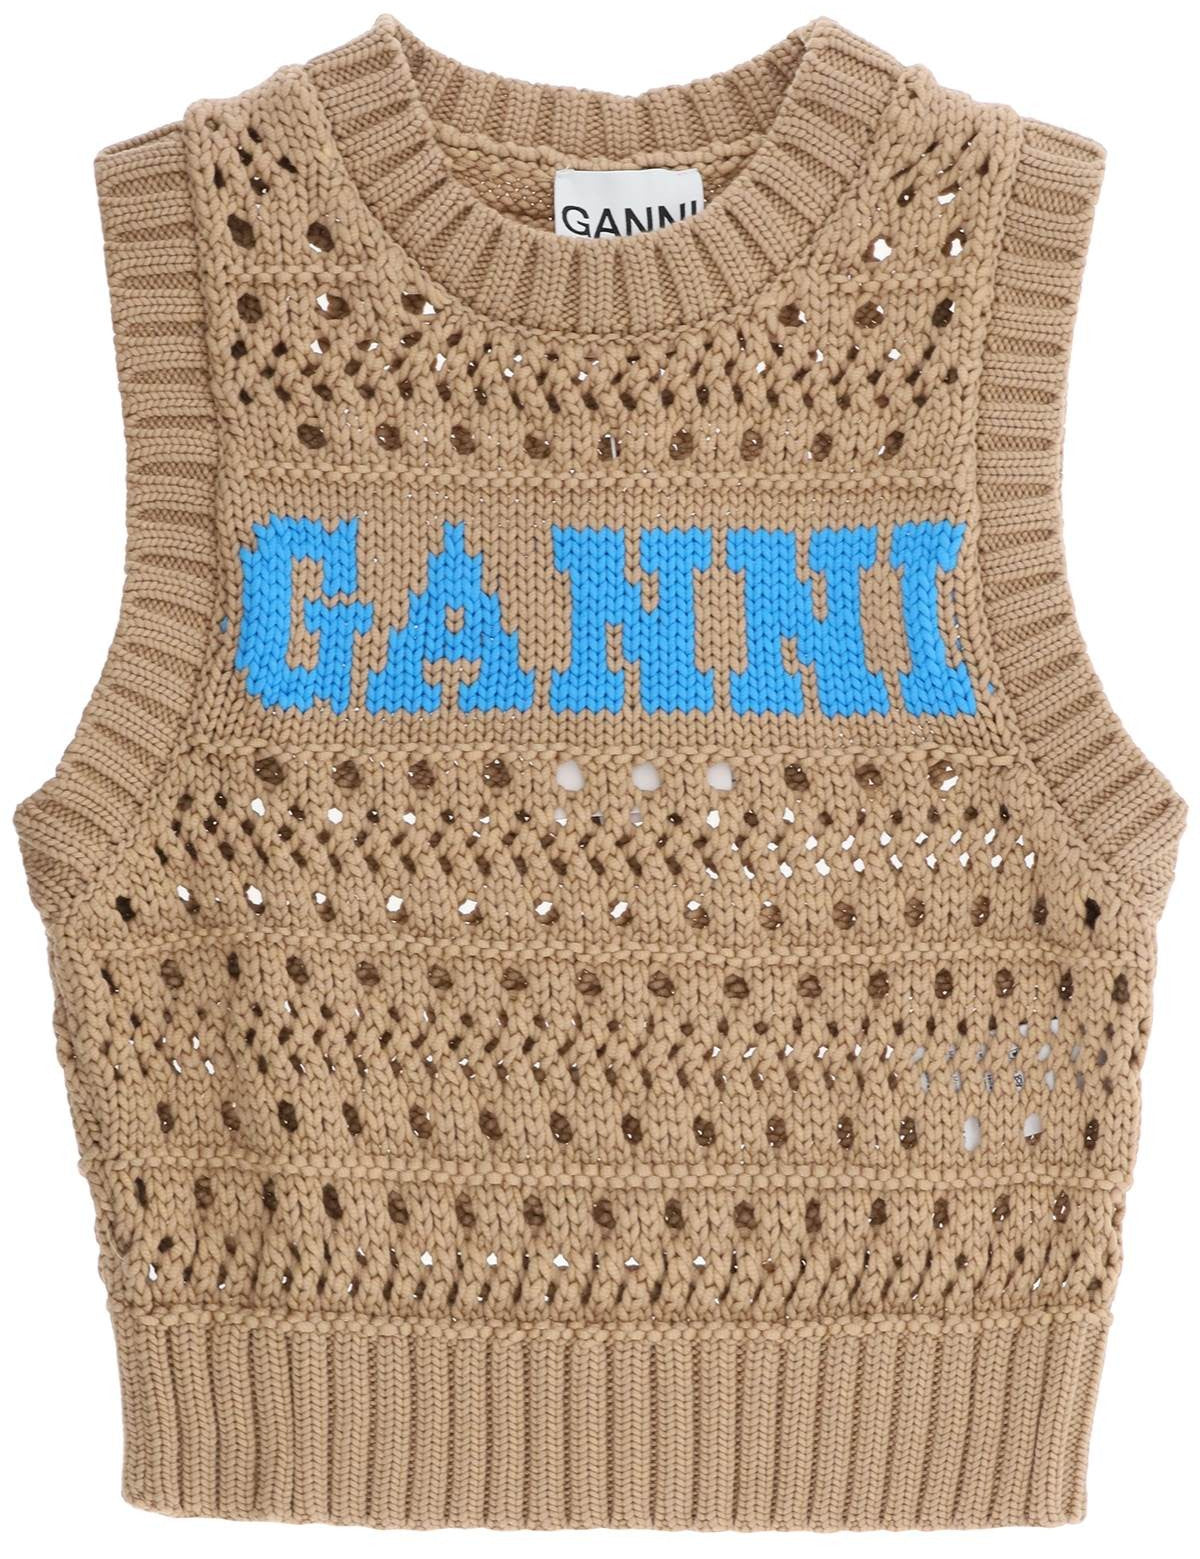 ganni-open-stitch-knitted-vest-with-logo_4a2eaec3-aaf1-4652-a130-e70f22d6f494.jpg